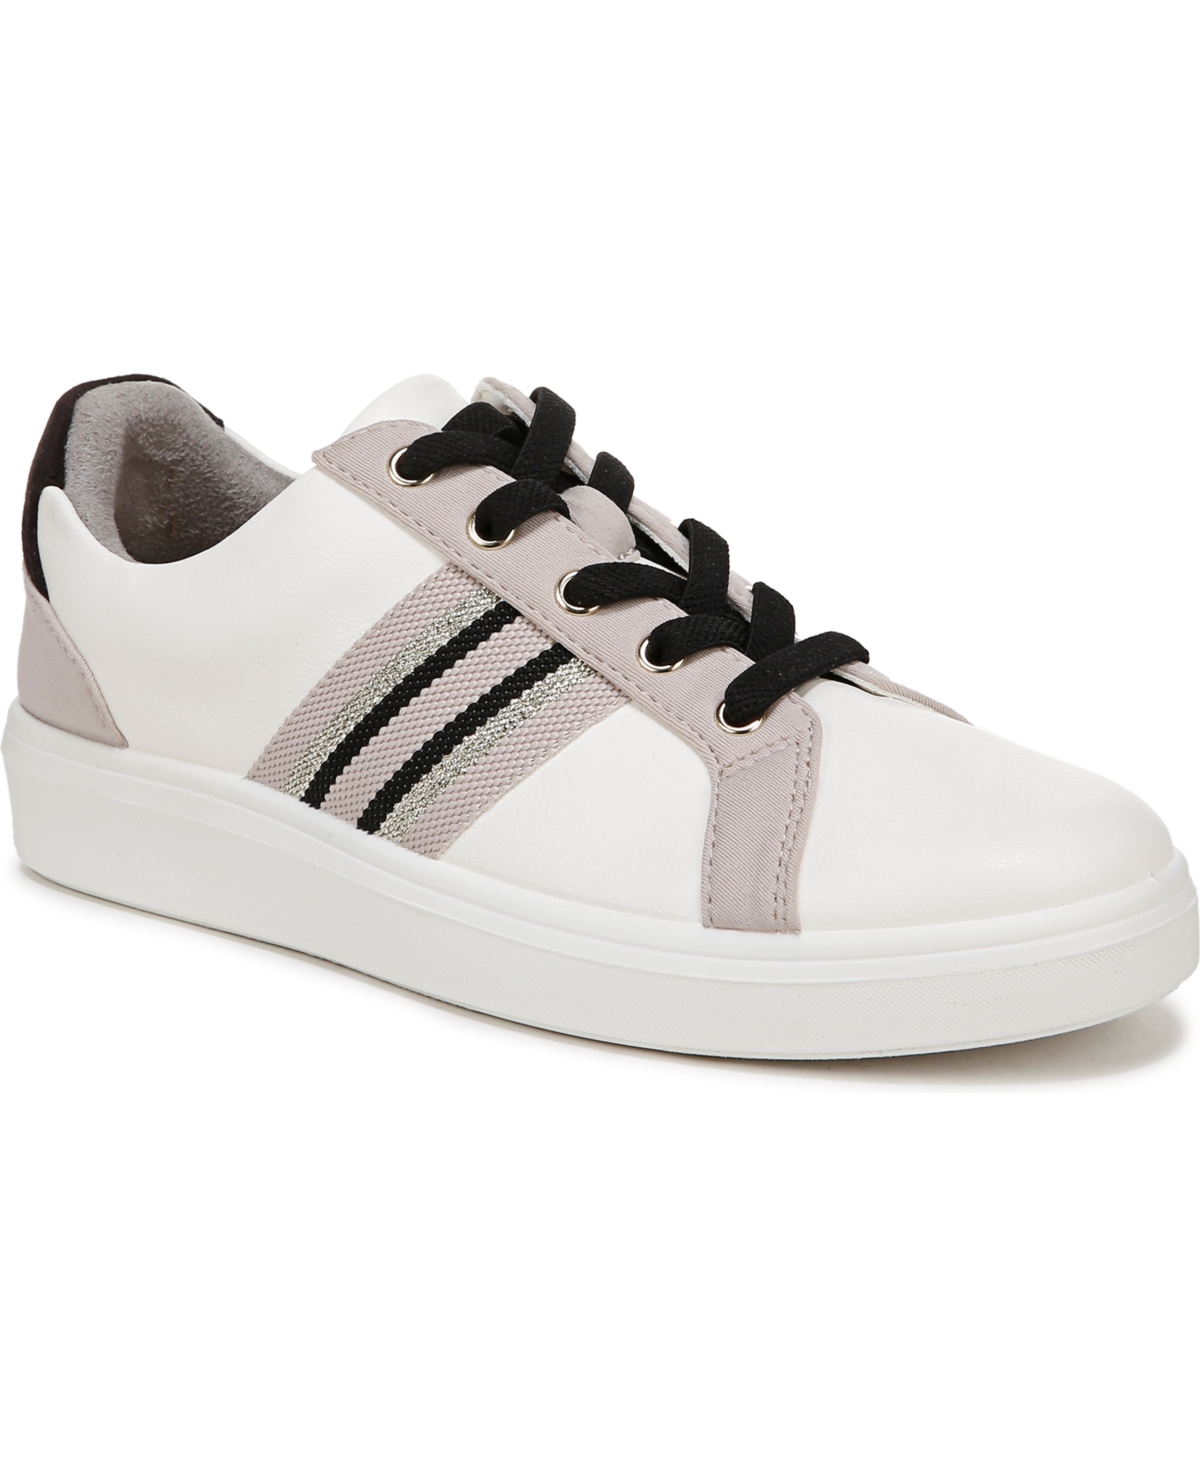 Happy Friday Washable Sneakers - White Faux Leather/Webbed Fabric